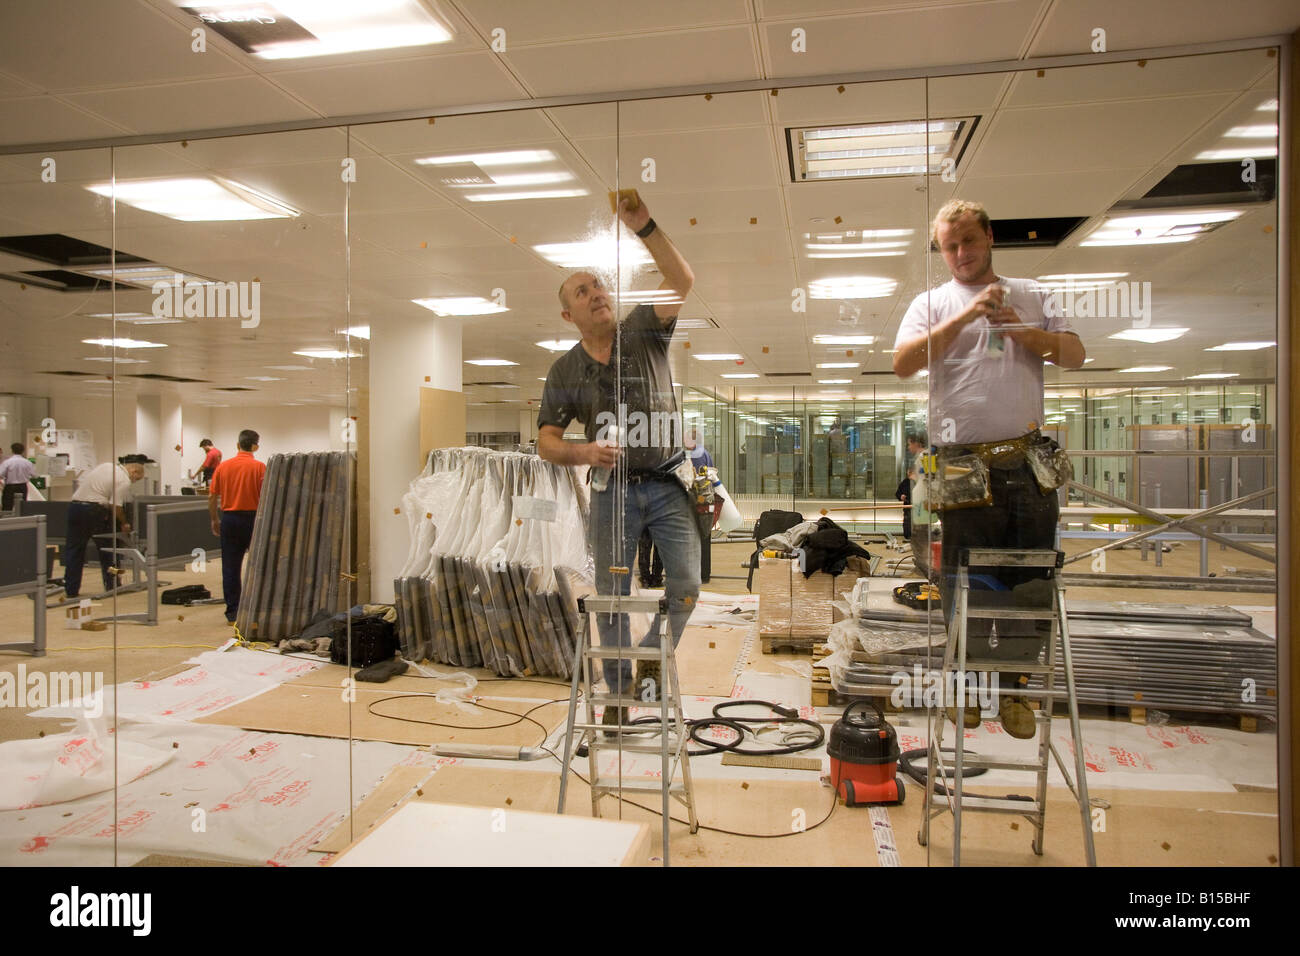 A workman cleans a glass parition in a newly constructed office building. Stock Photo